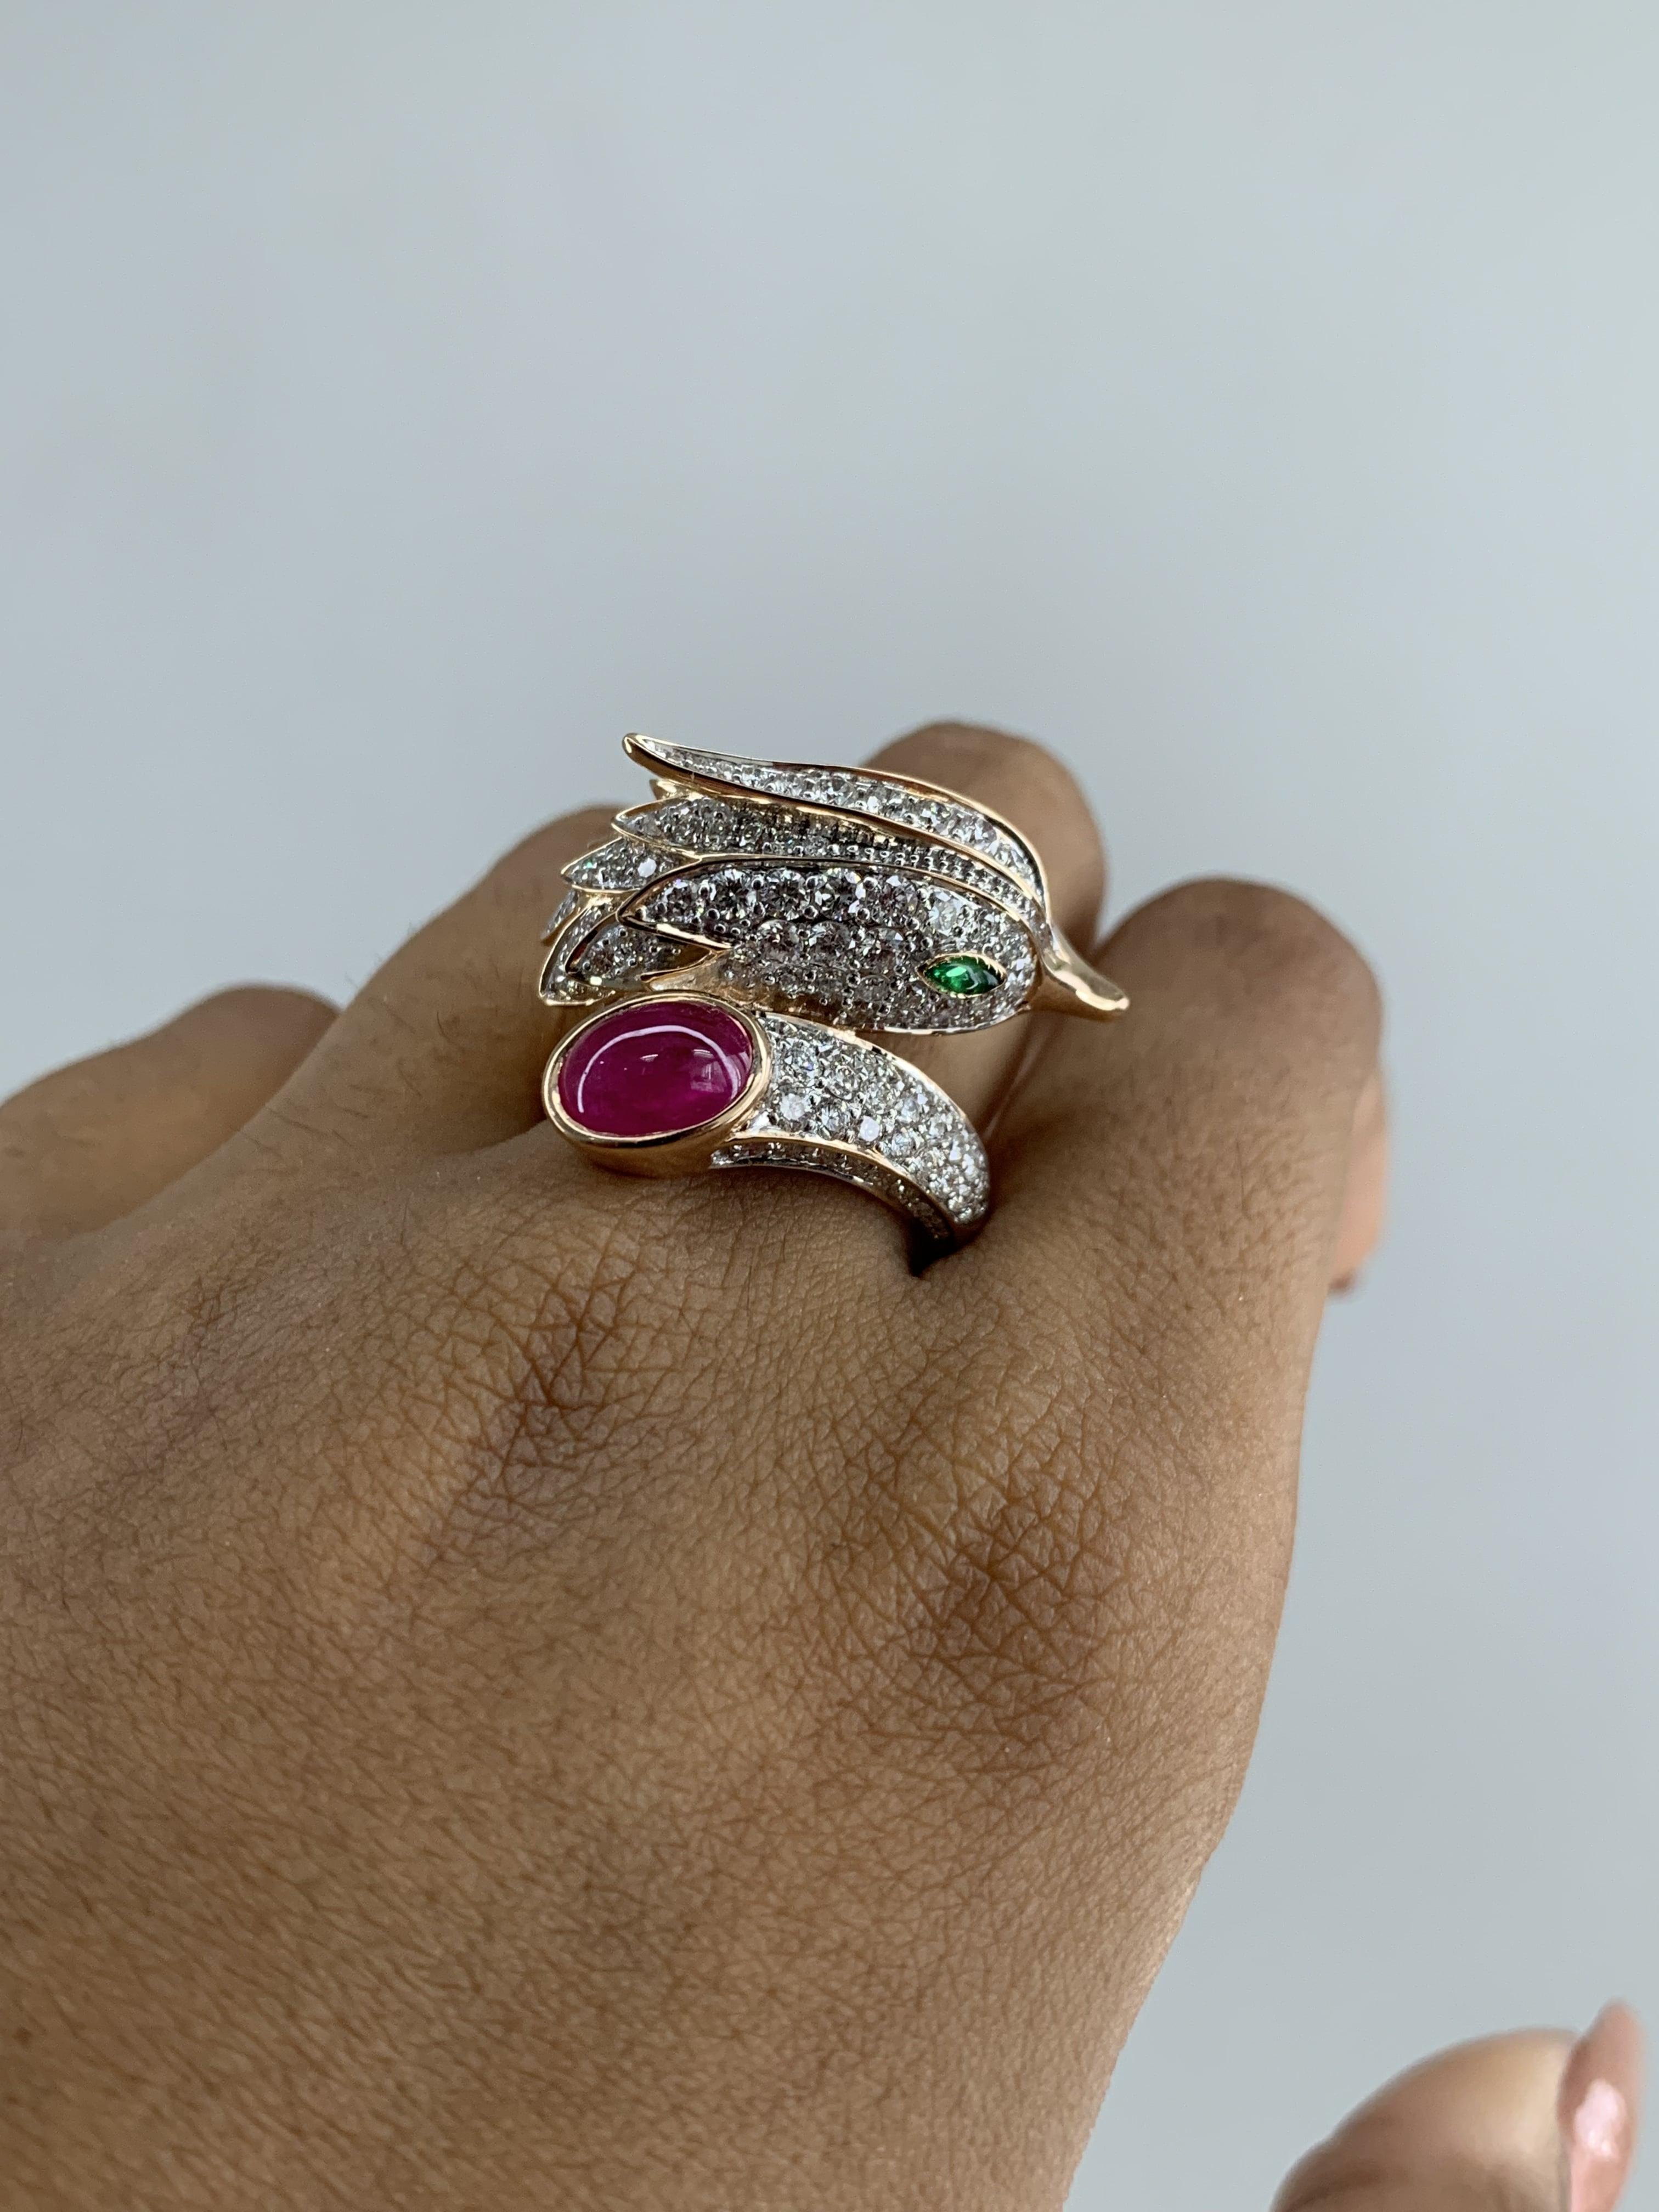 Peacock Inspired 18K Gold Statement Ring with Diamonds and 1.96 Ct Ruby Cabochon 4